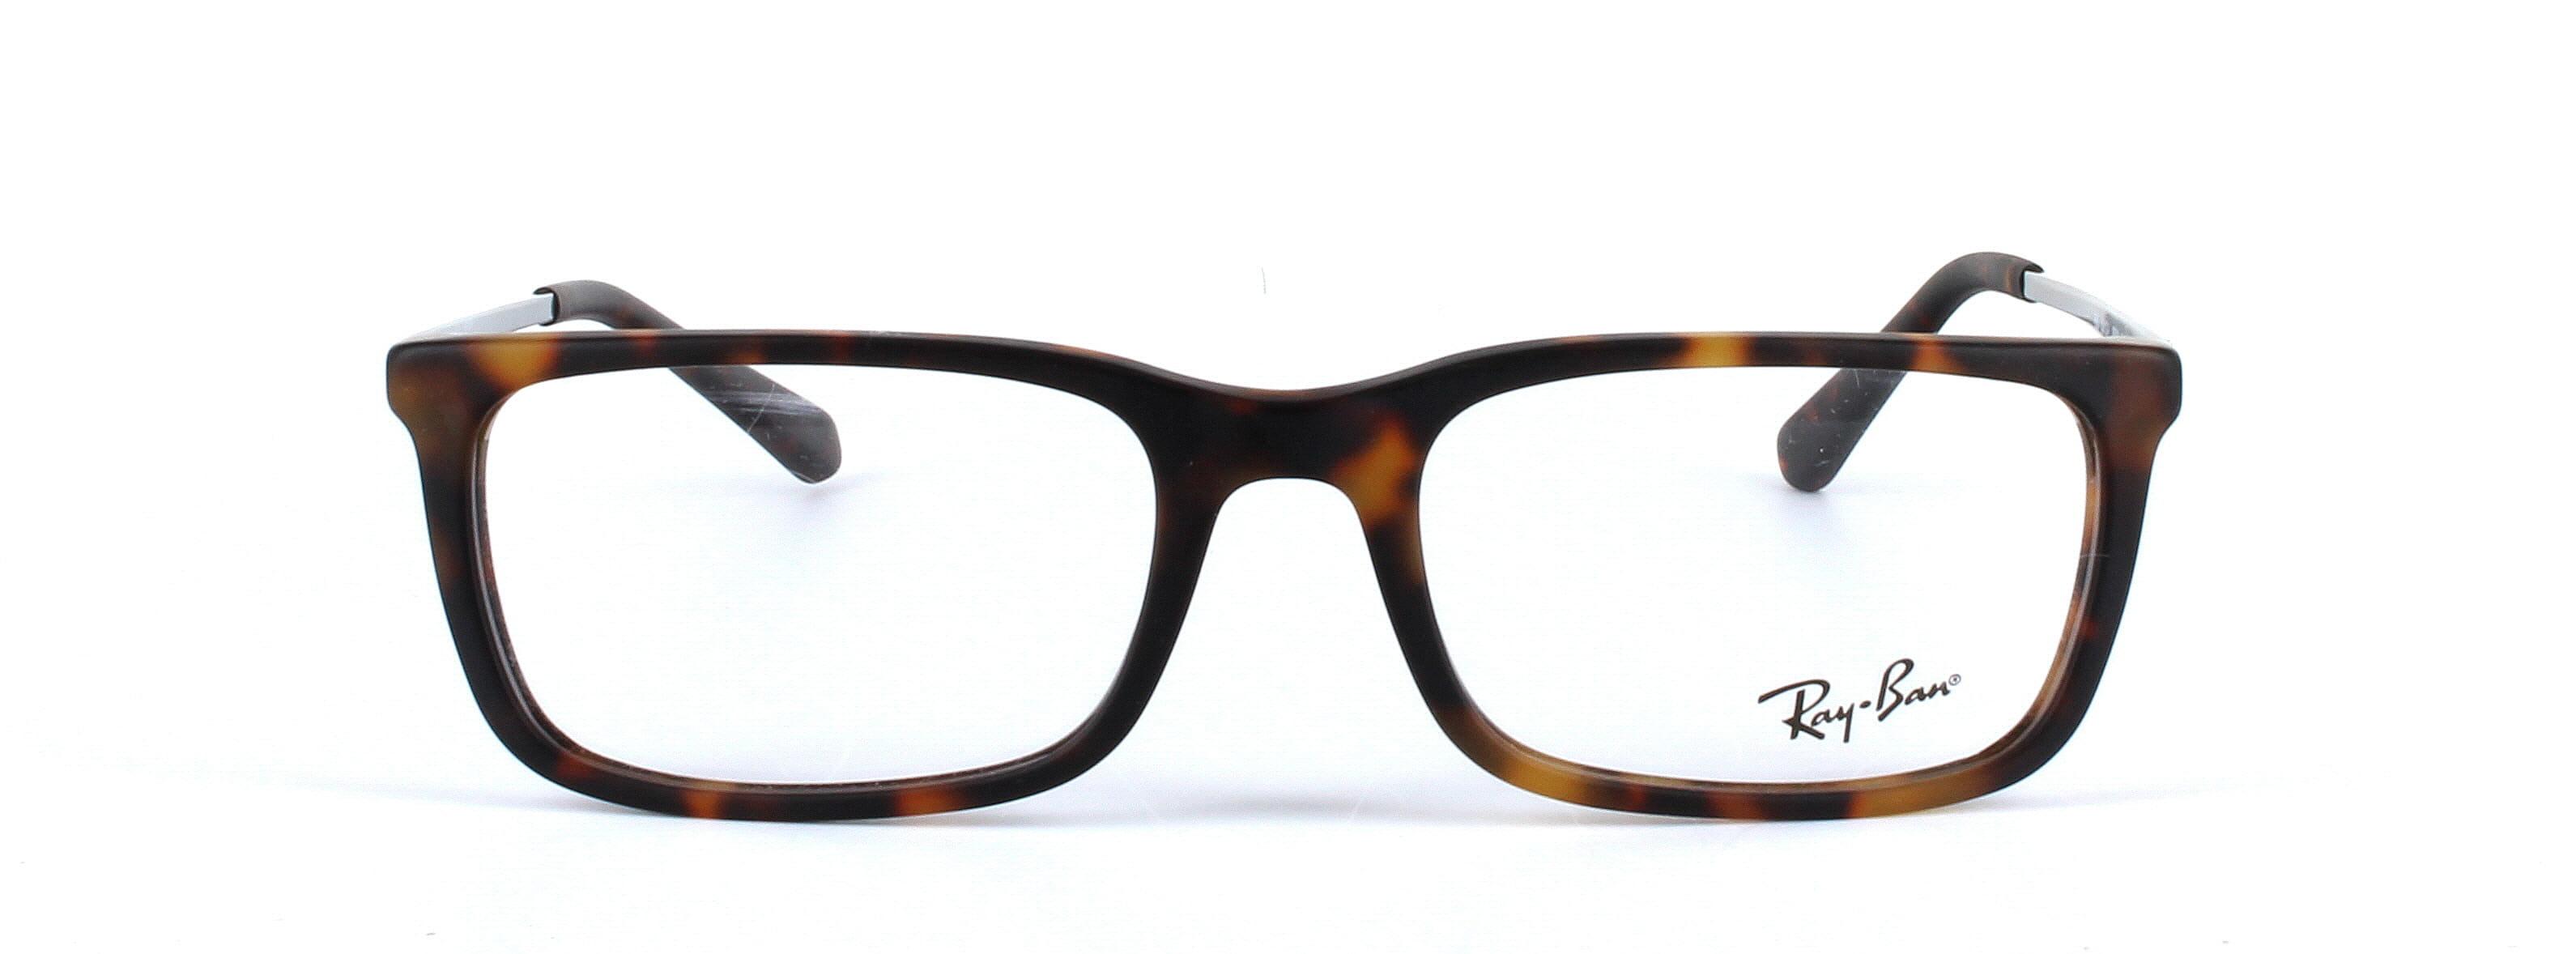 Ray ban 53121 - Unisex tortoise frame with metal arms - image 5